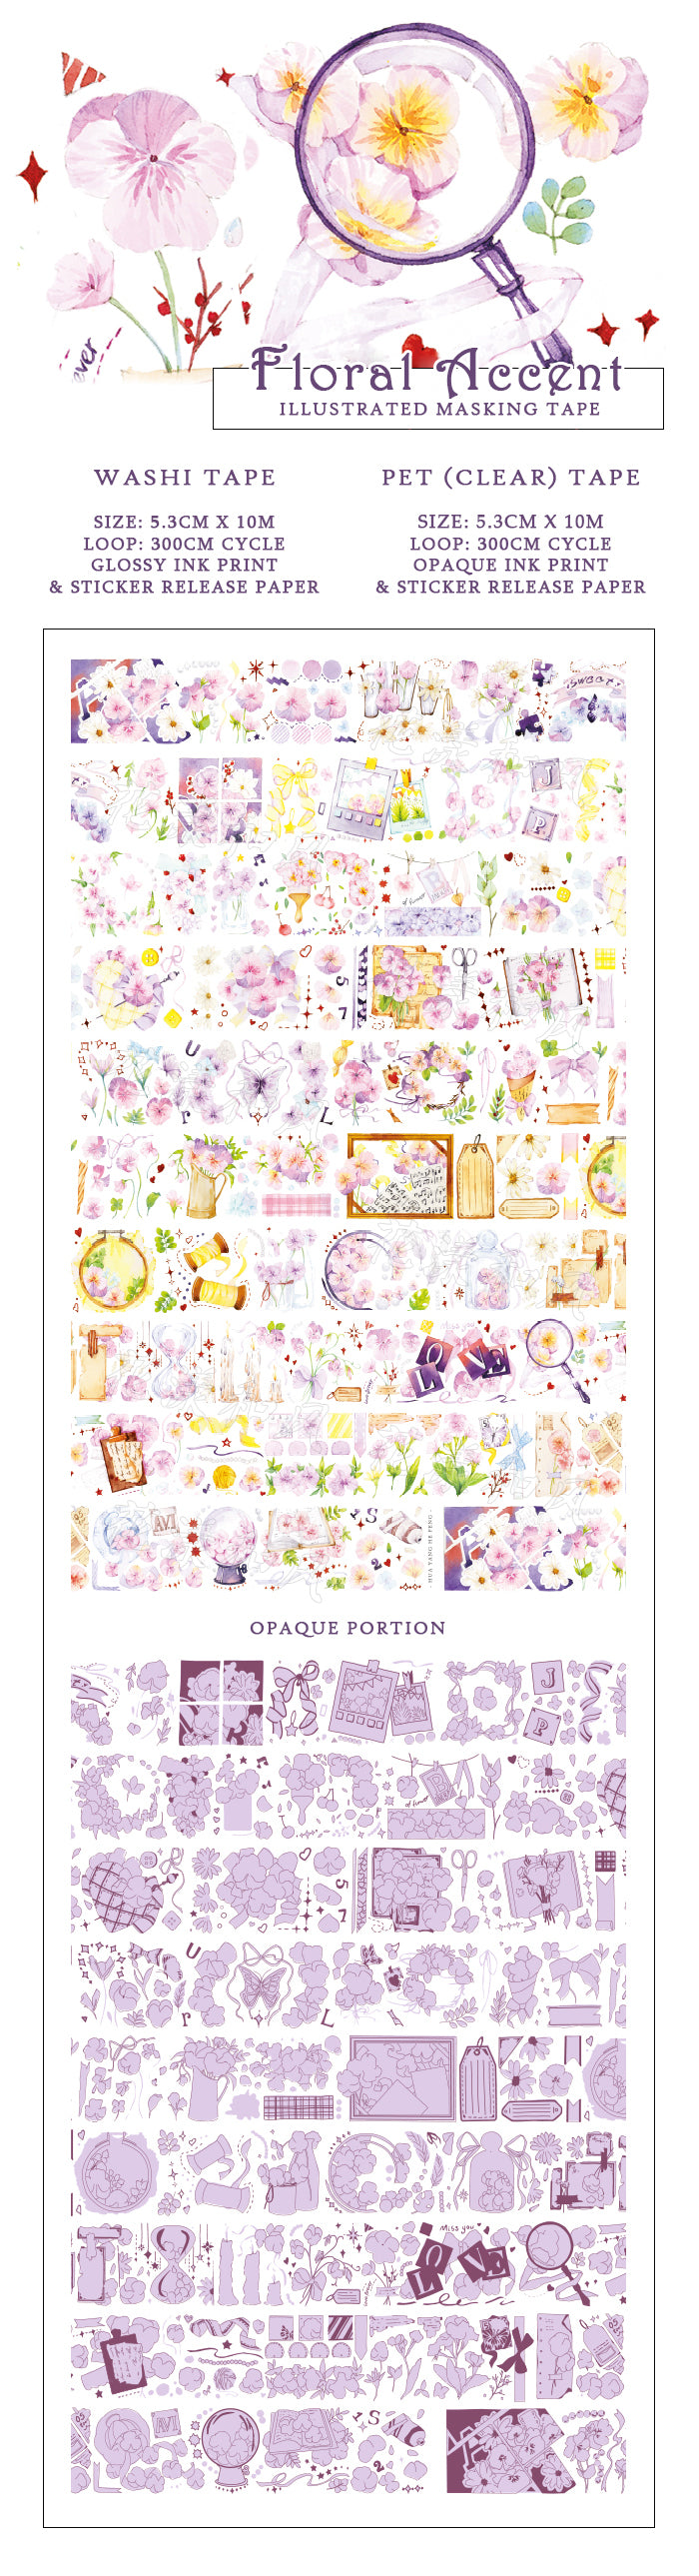 Floral Accent Masking Tape